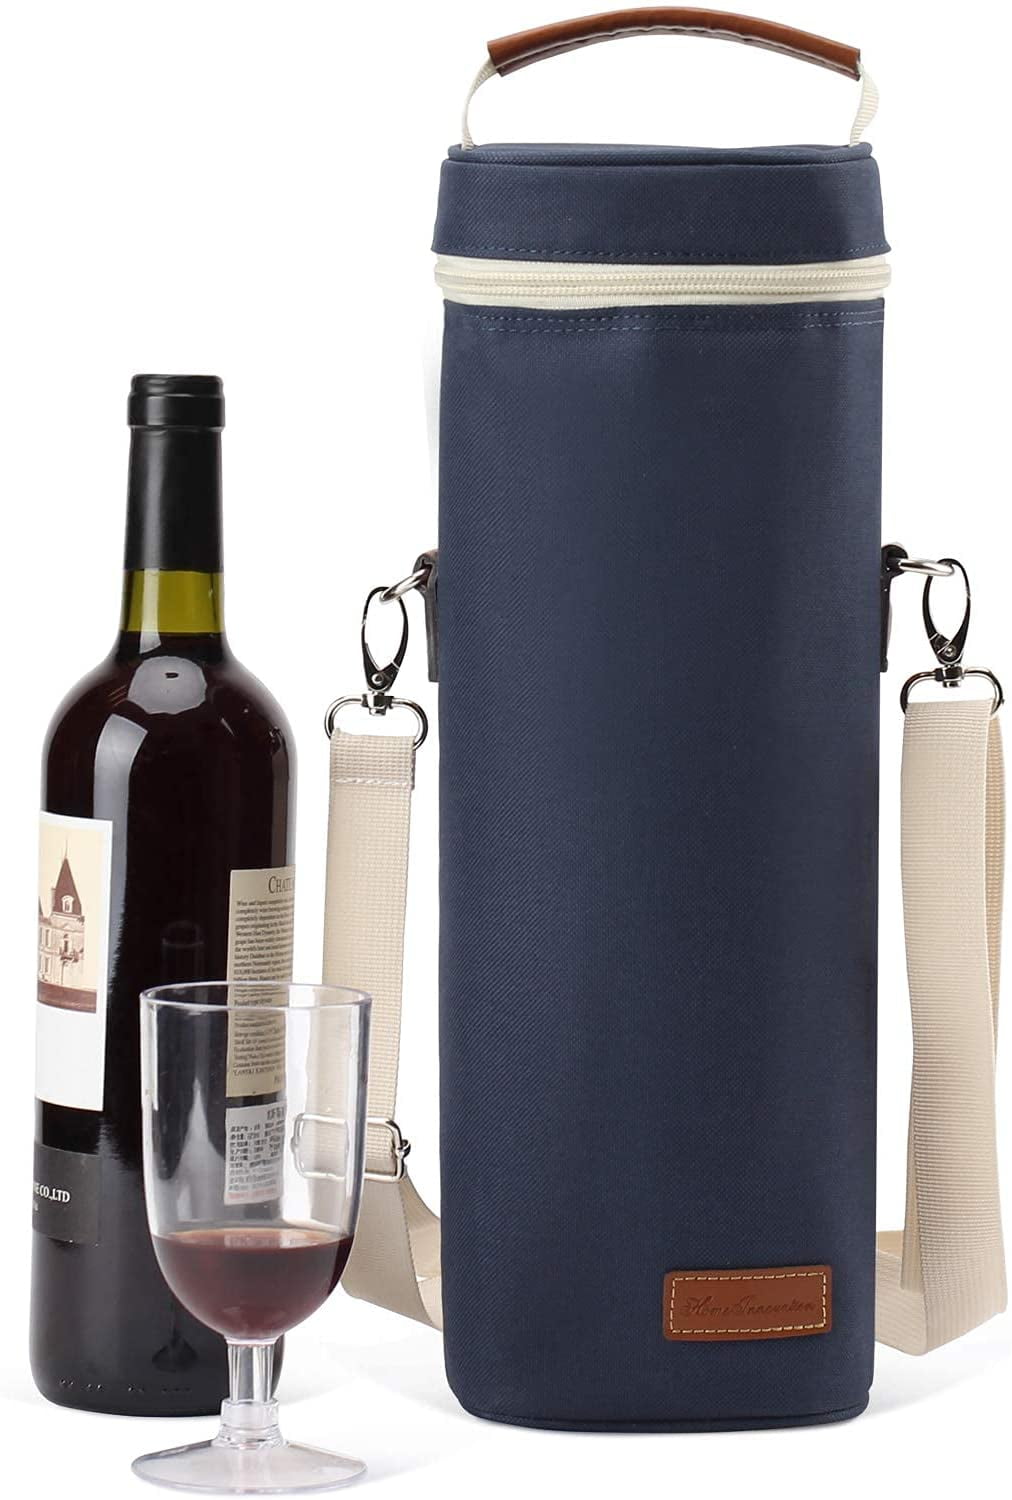 Travel Padded Wine Cooler with Corkscrew Opener and Adjustable Shoulder Strap Perfect Wine Lovers or Wedding Gift-Navy Blue Personalized Wine Carrier Bag 1 Bottle Insulated Wine Tote